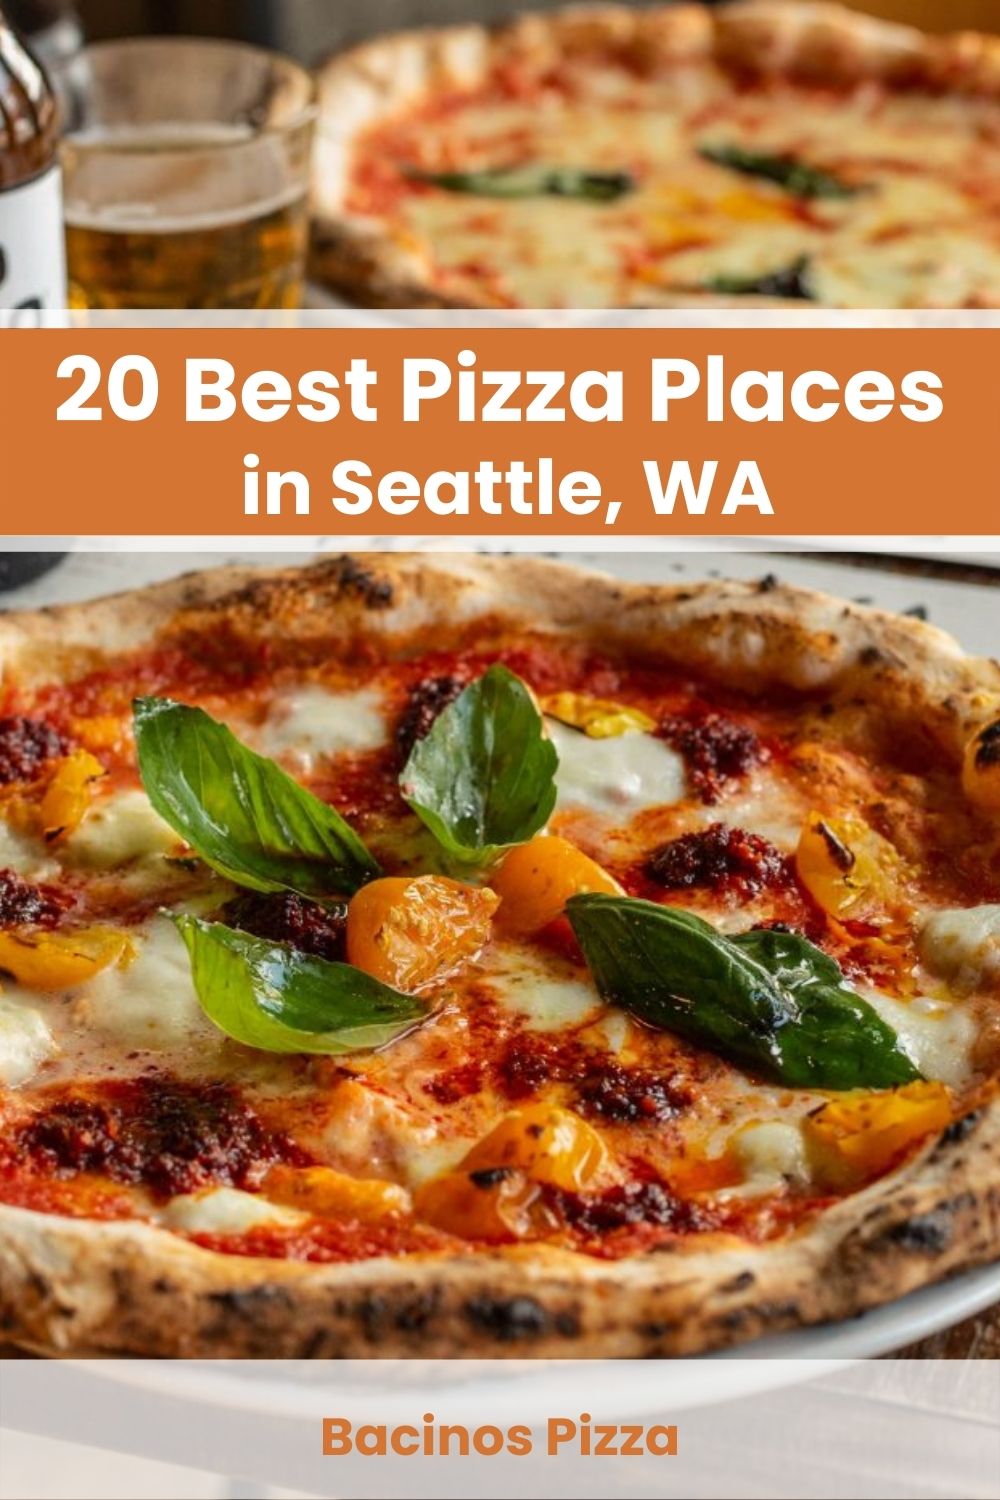 Best Pizza Places in Seattle, WA